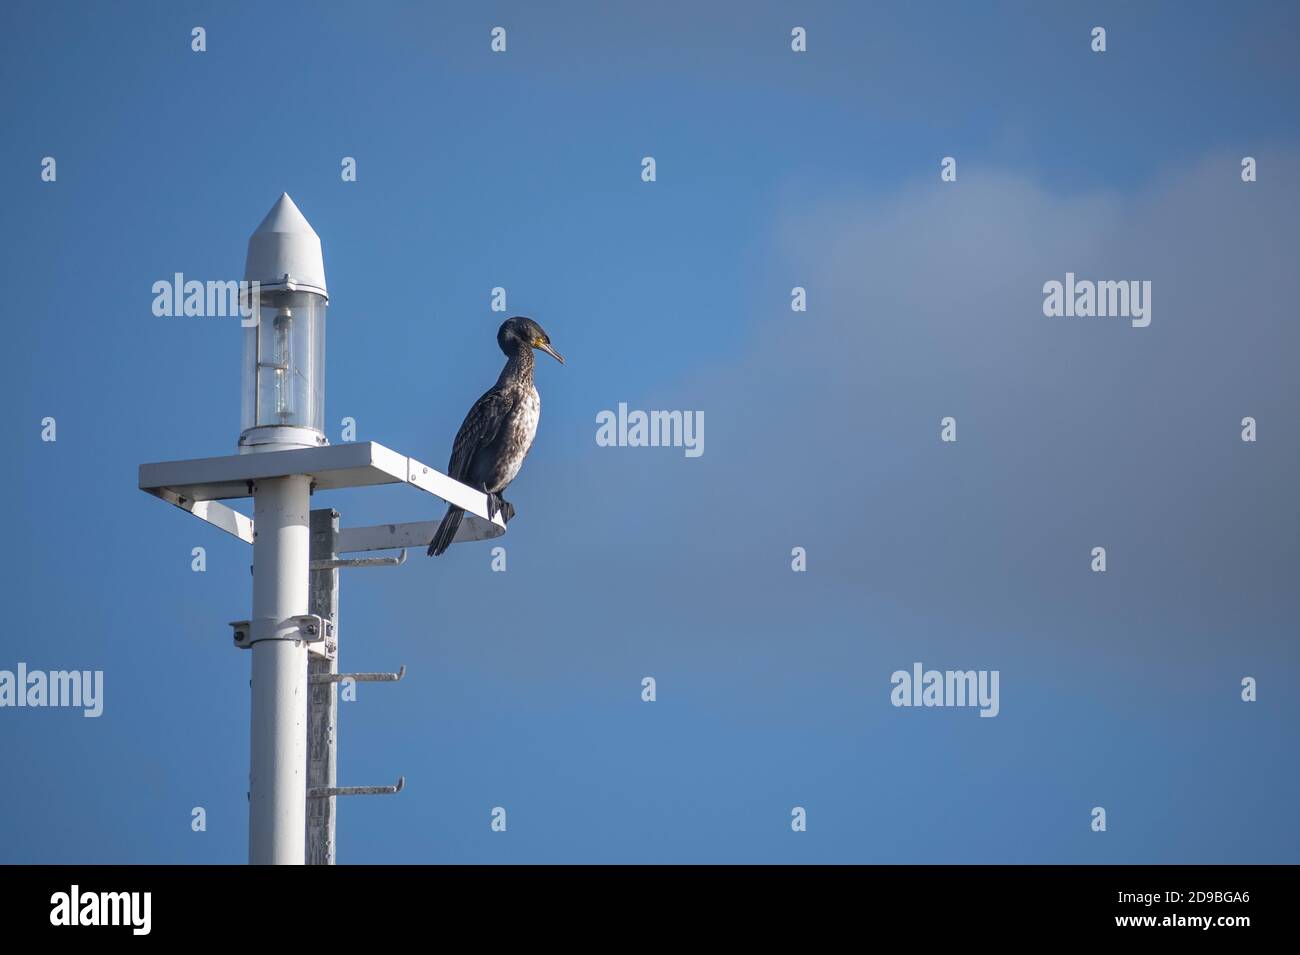 Great cormorant (Phalacrocorax carbo) is sitting on a modern streetlamp, the seabird is also known as black shag, blue sky with large copy space Stock Photo